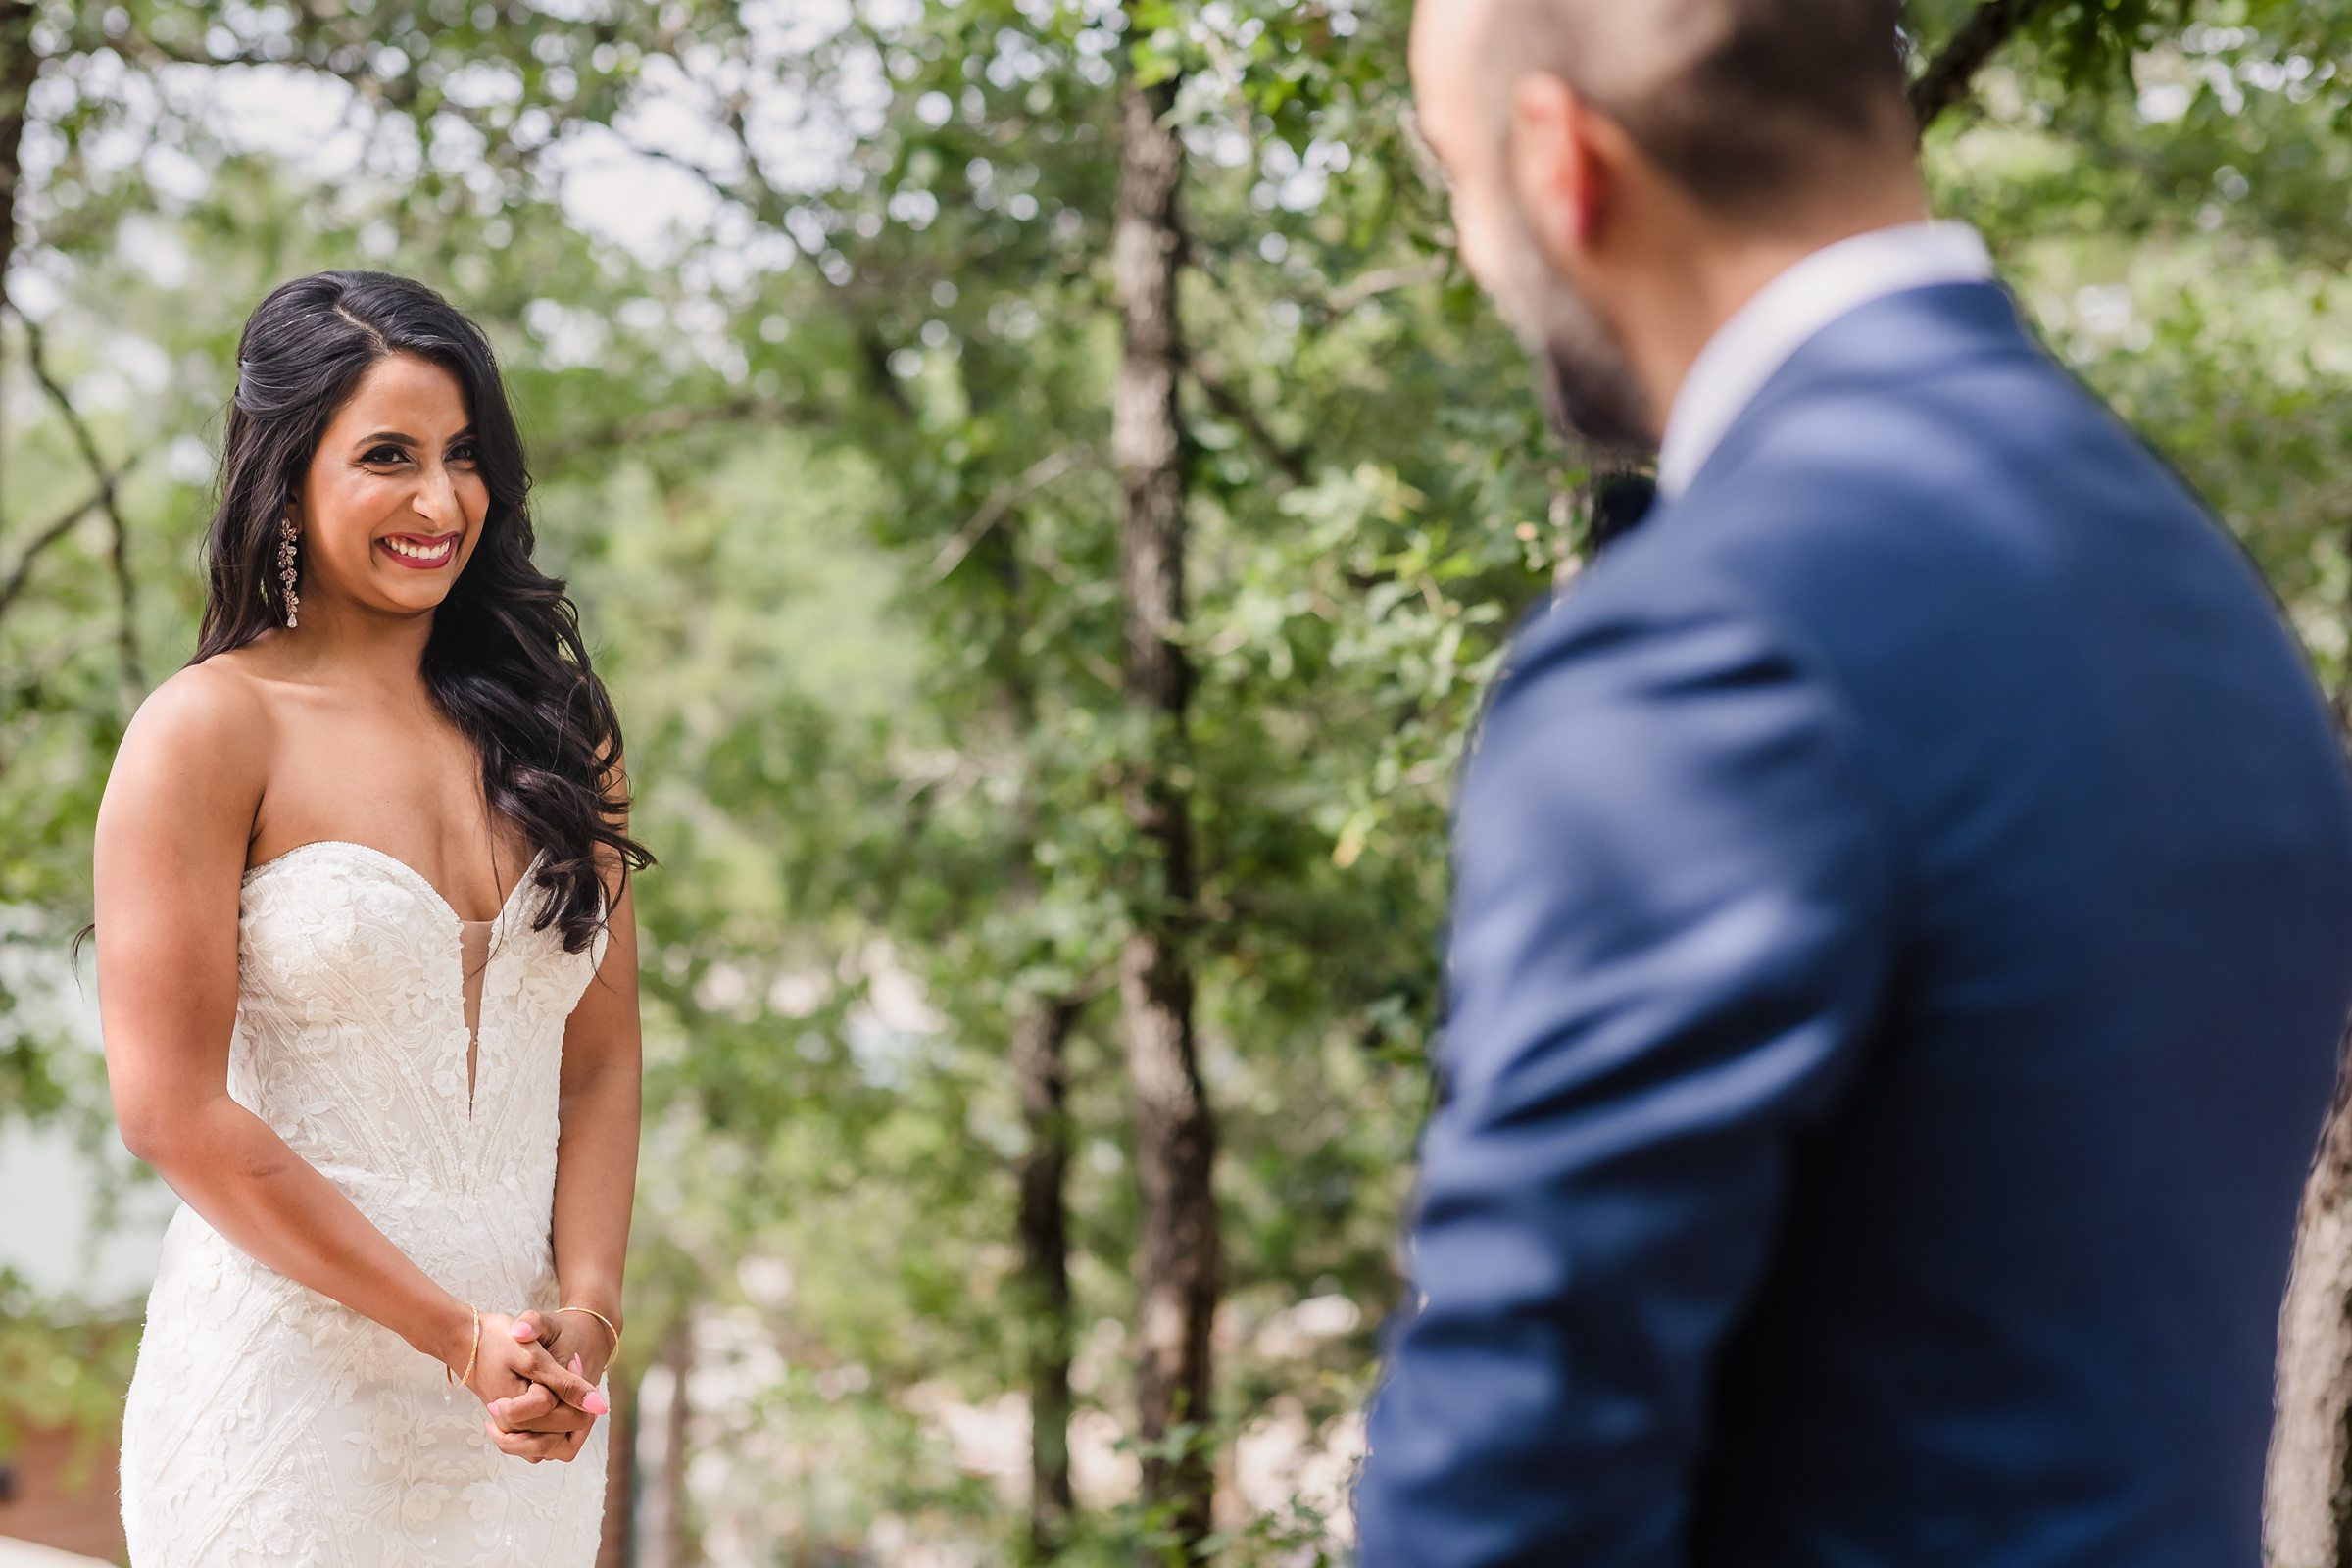 Bride sees the groom for the first time during a wedding at the Shiraz Garden in Bastrop, Texas.